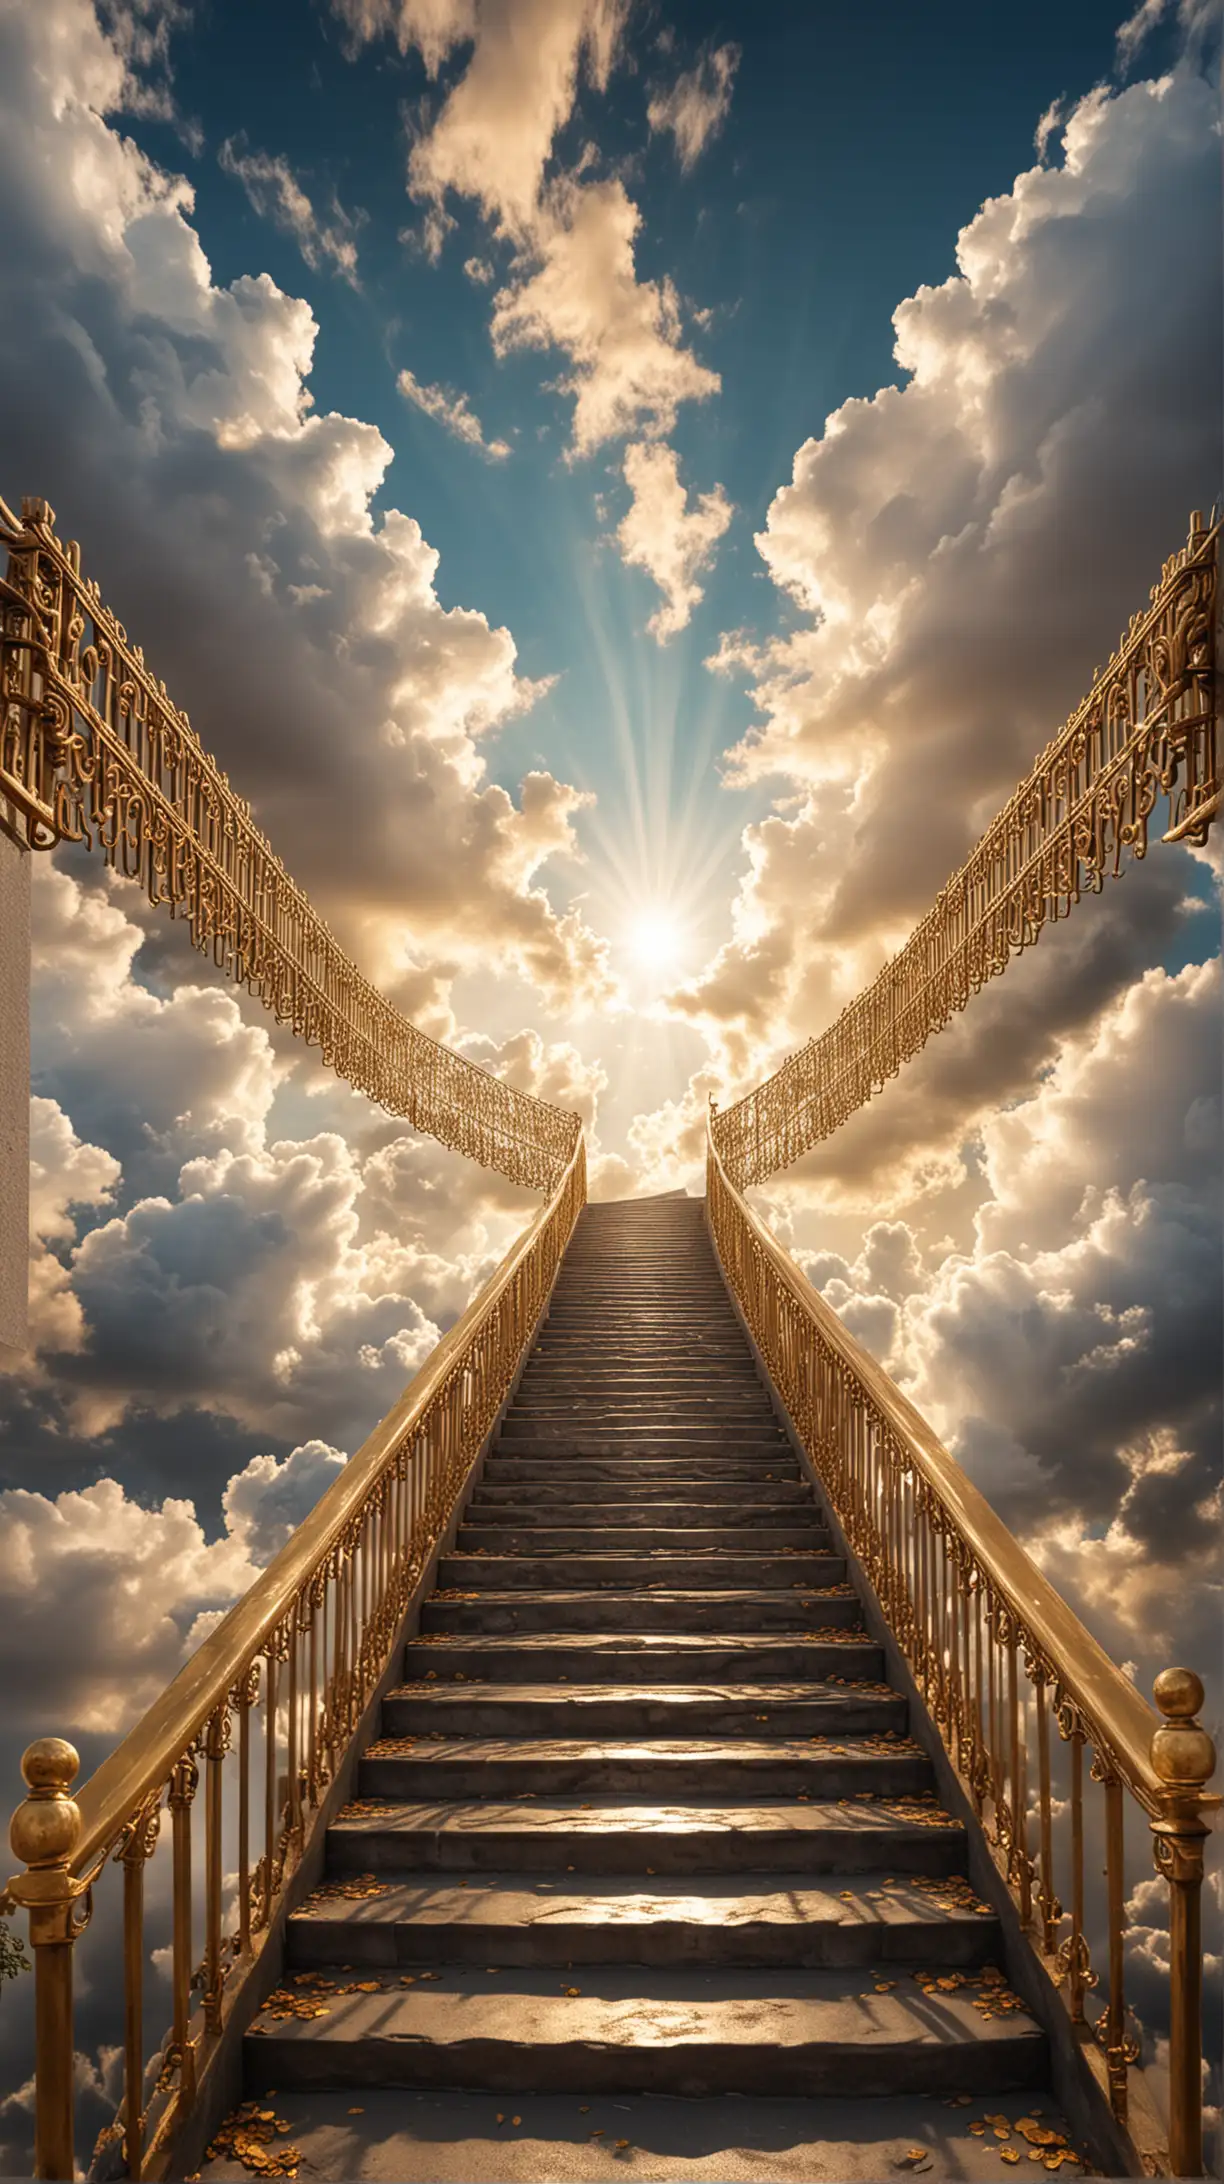 a stairs towards  the cloud in the sky, with golden gates, look like stairs to heaven